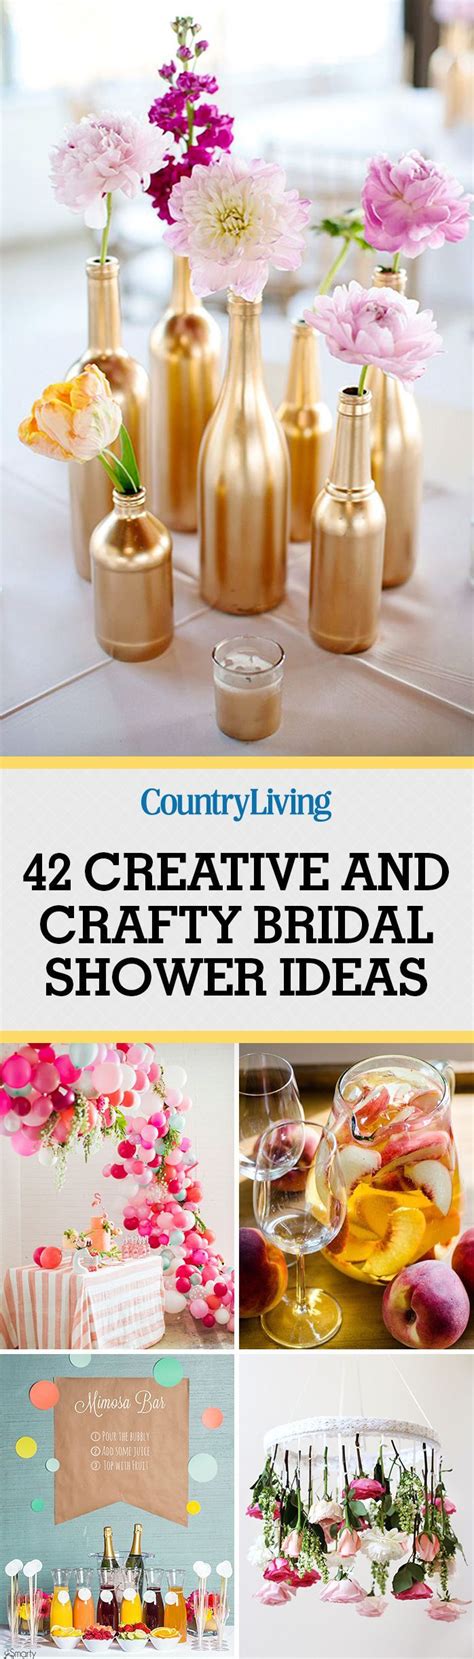 50 Best Bridal Shower Ideas Fun Themes Food And Decorating Ideas For Wedding Showers Diy